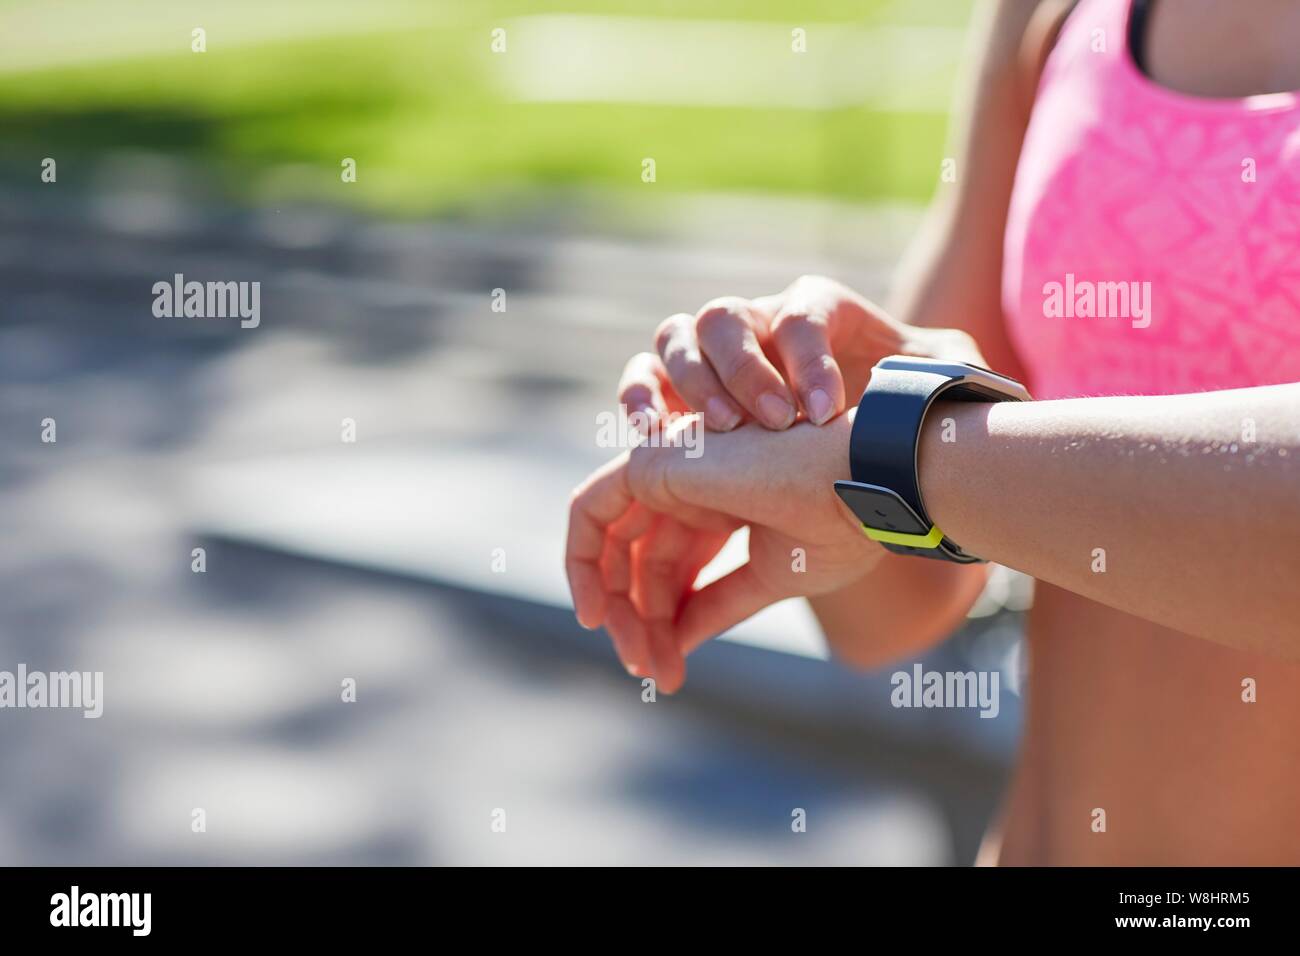 Woman wearing sports watch checking the time. Stock Photo